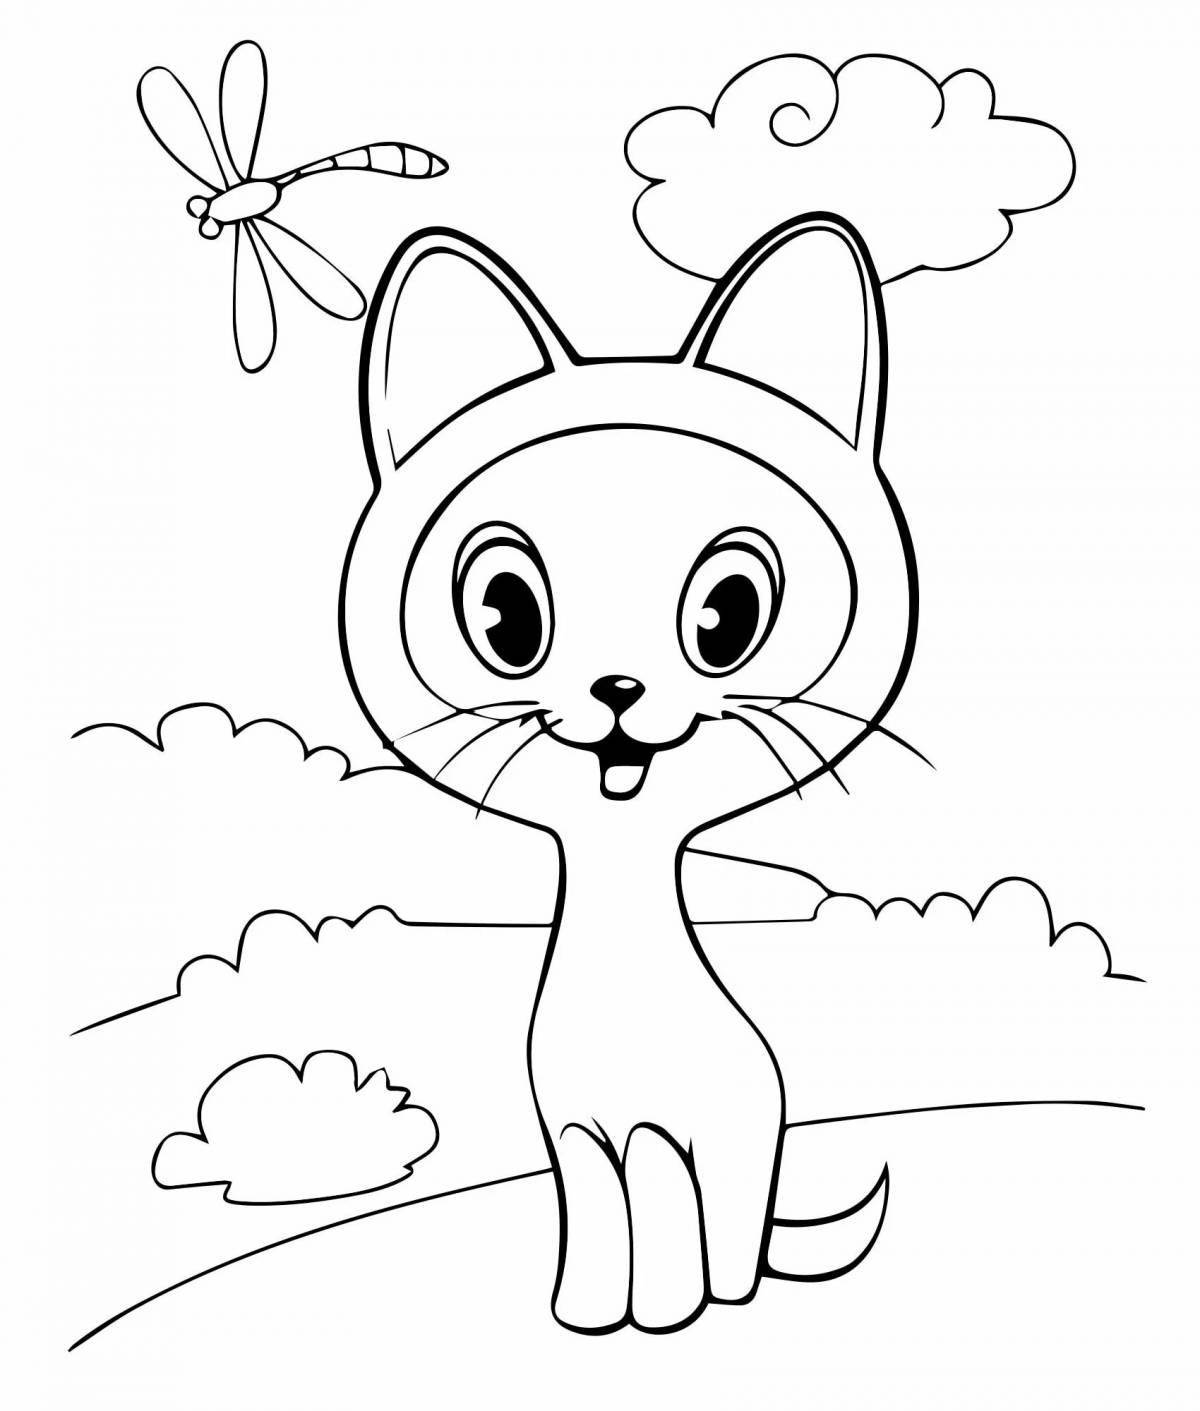 Woof bright coloring page